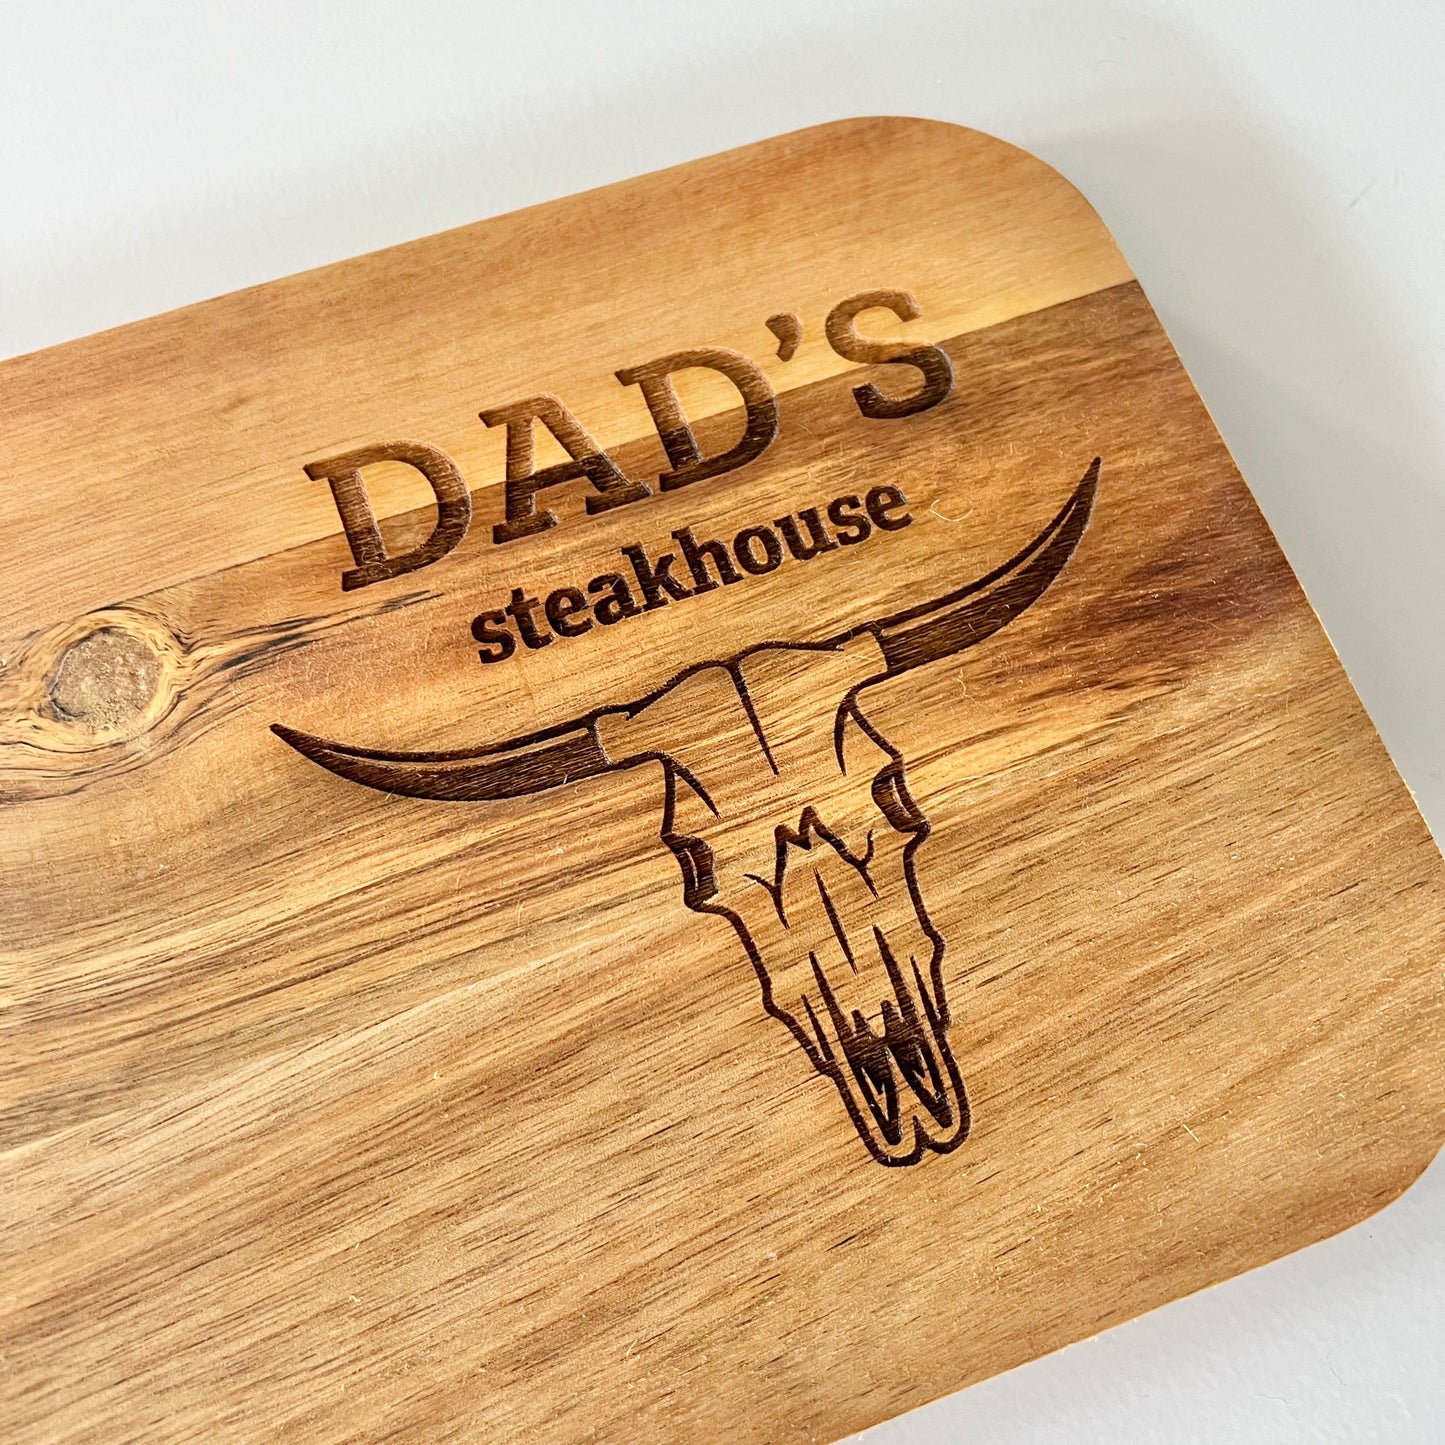 Dad’s steakhouse